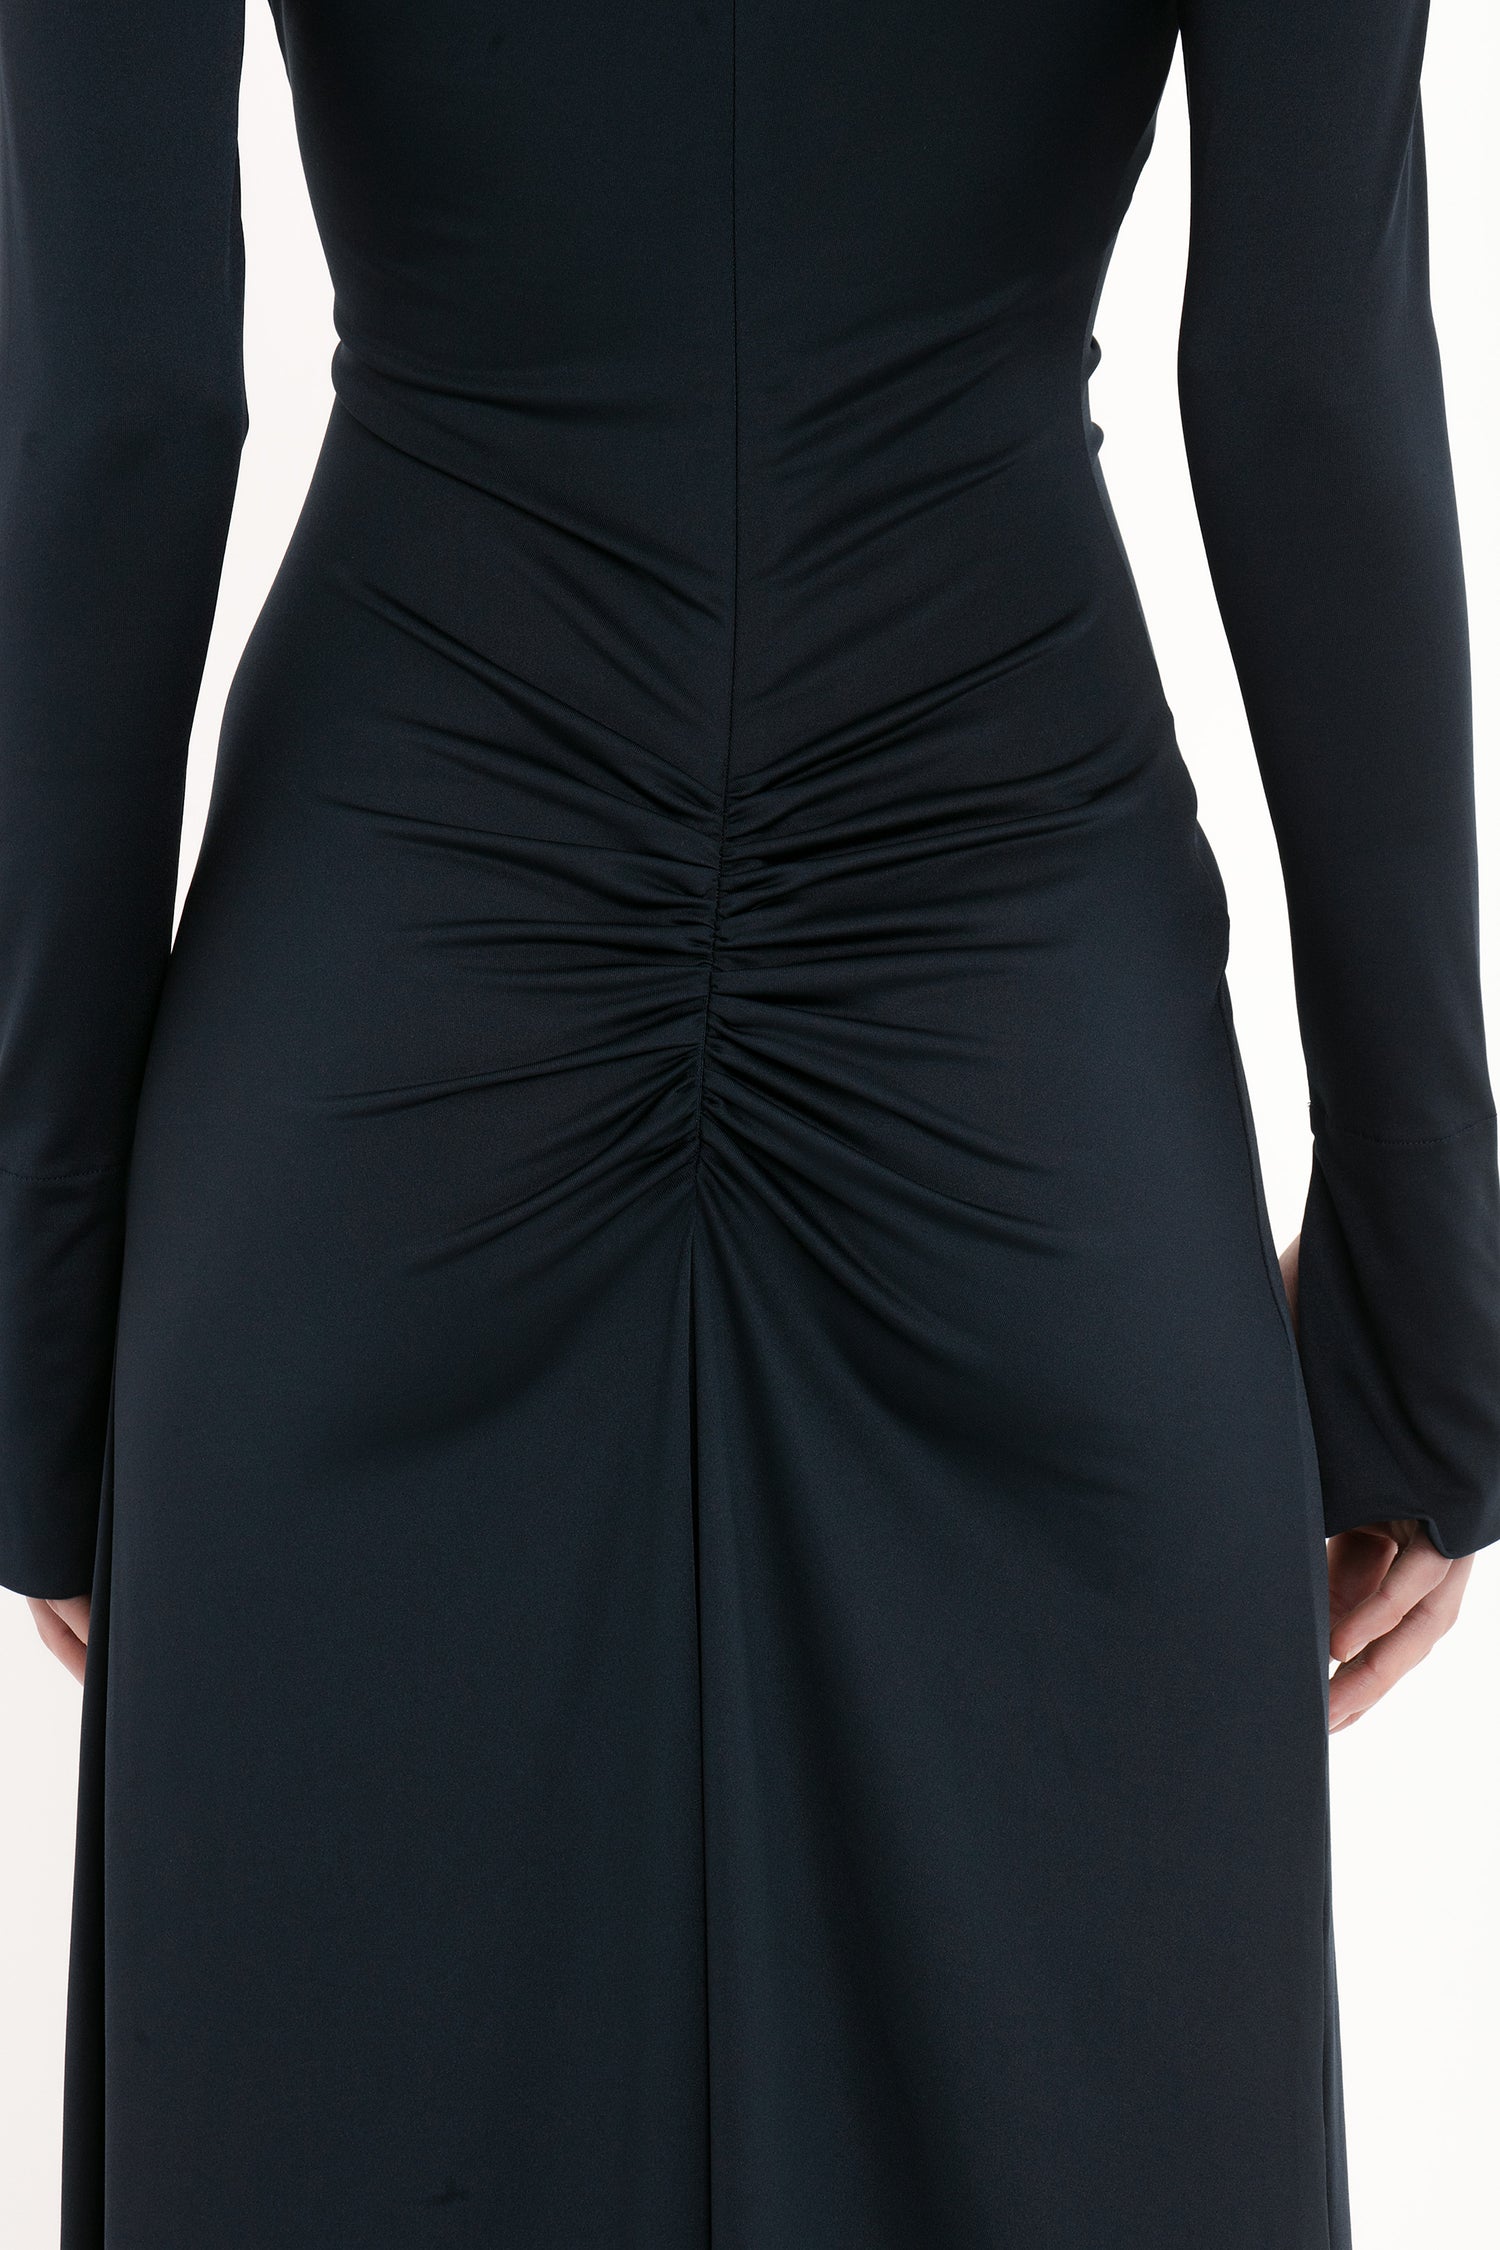 Close-up of the back of a person wearing a Ruched Detail Floor-Length Gown In Midnight by Victoria Beckham with ruched detail along the center seam.